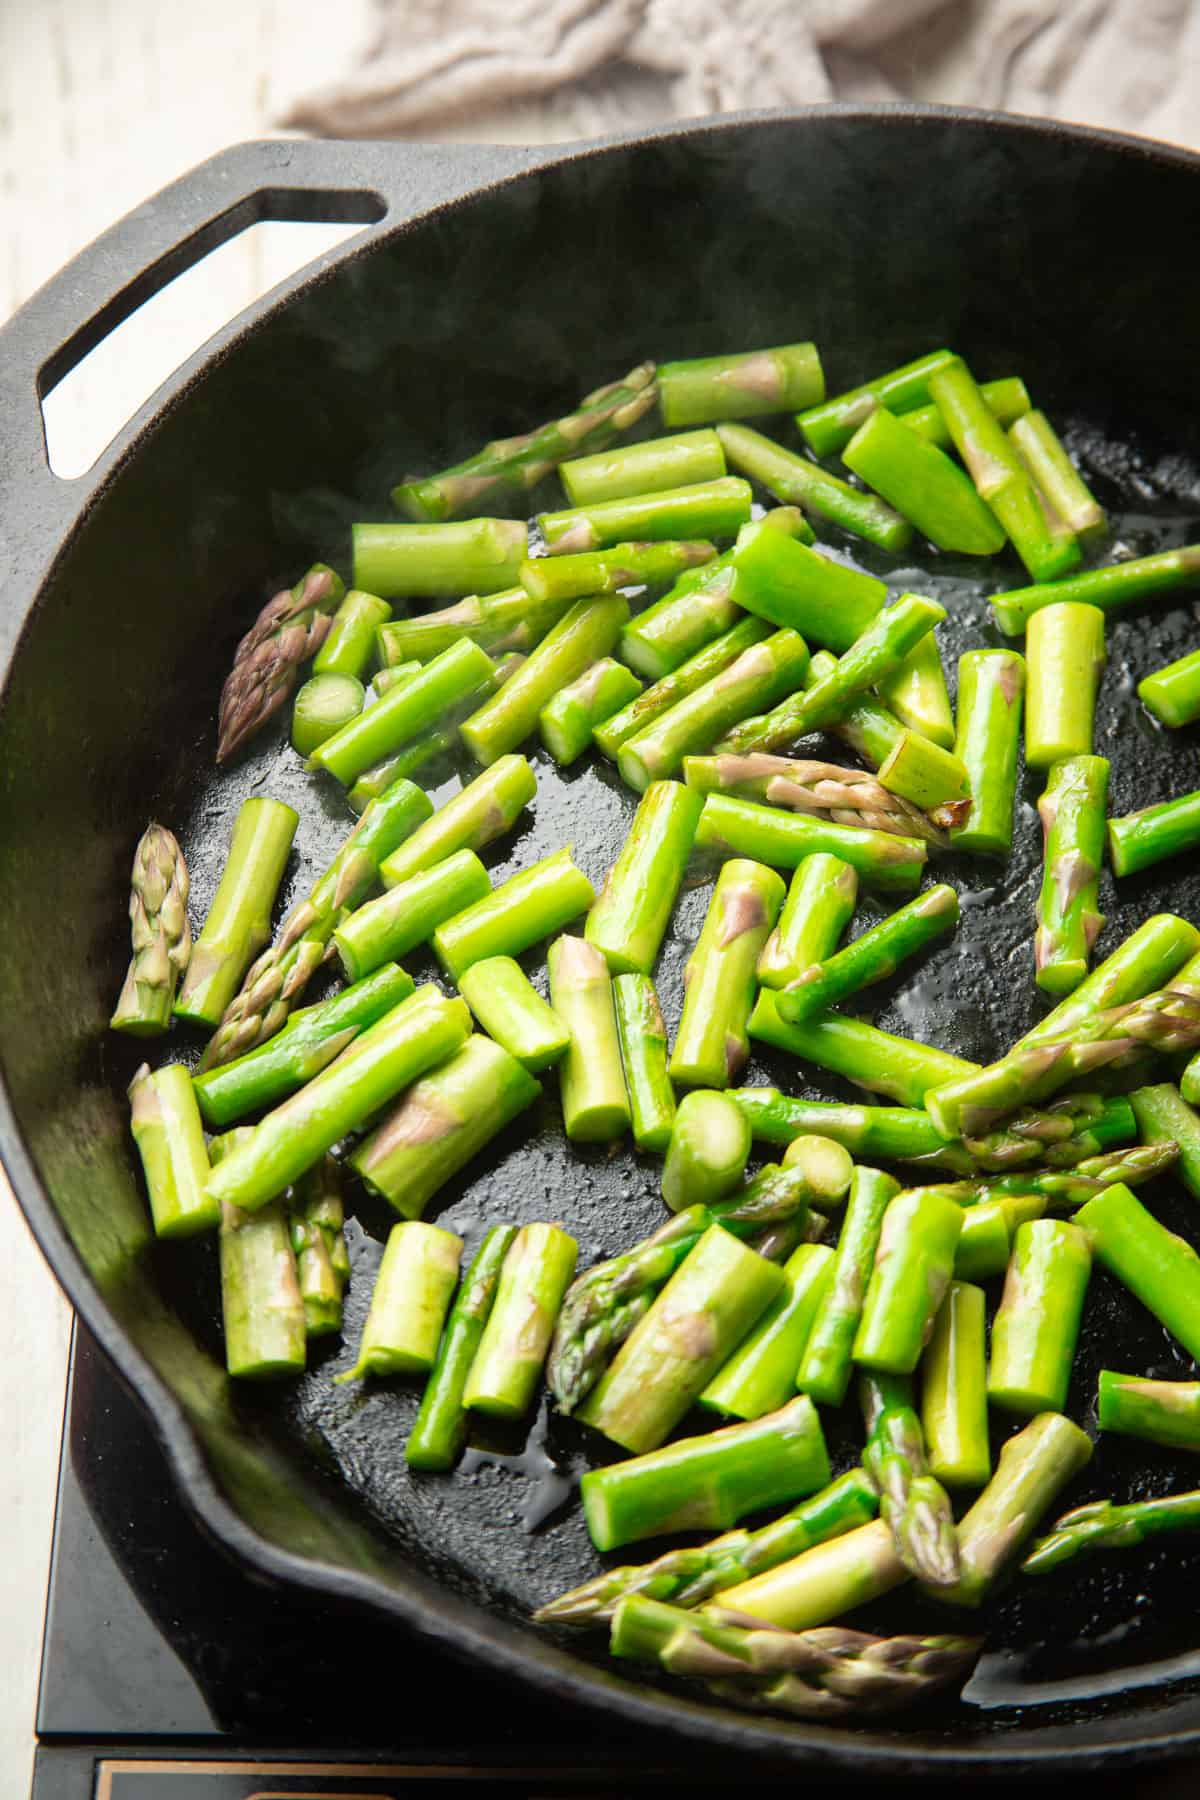 Chopped asparagus spears cooking in a skillet.